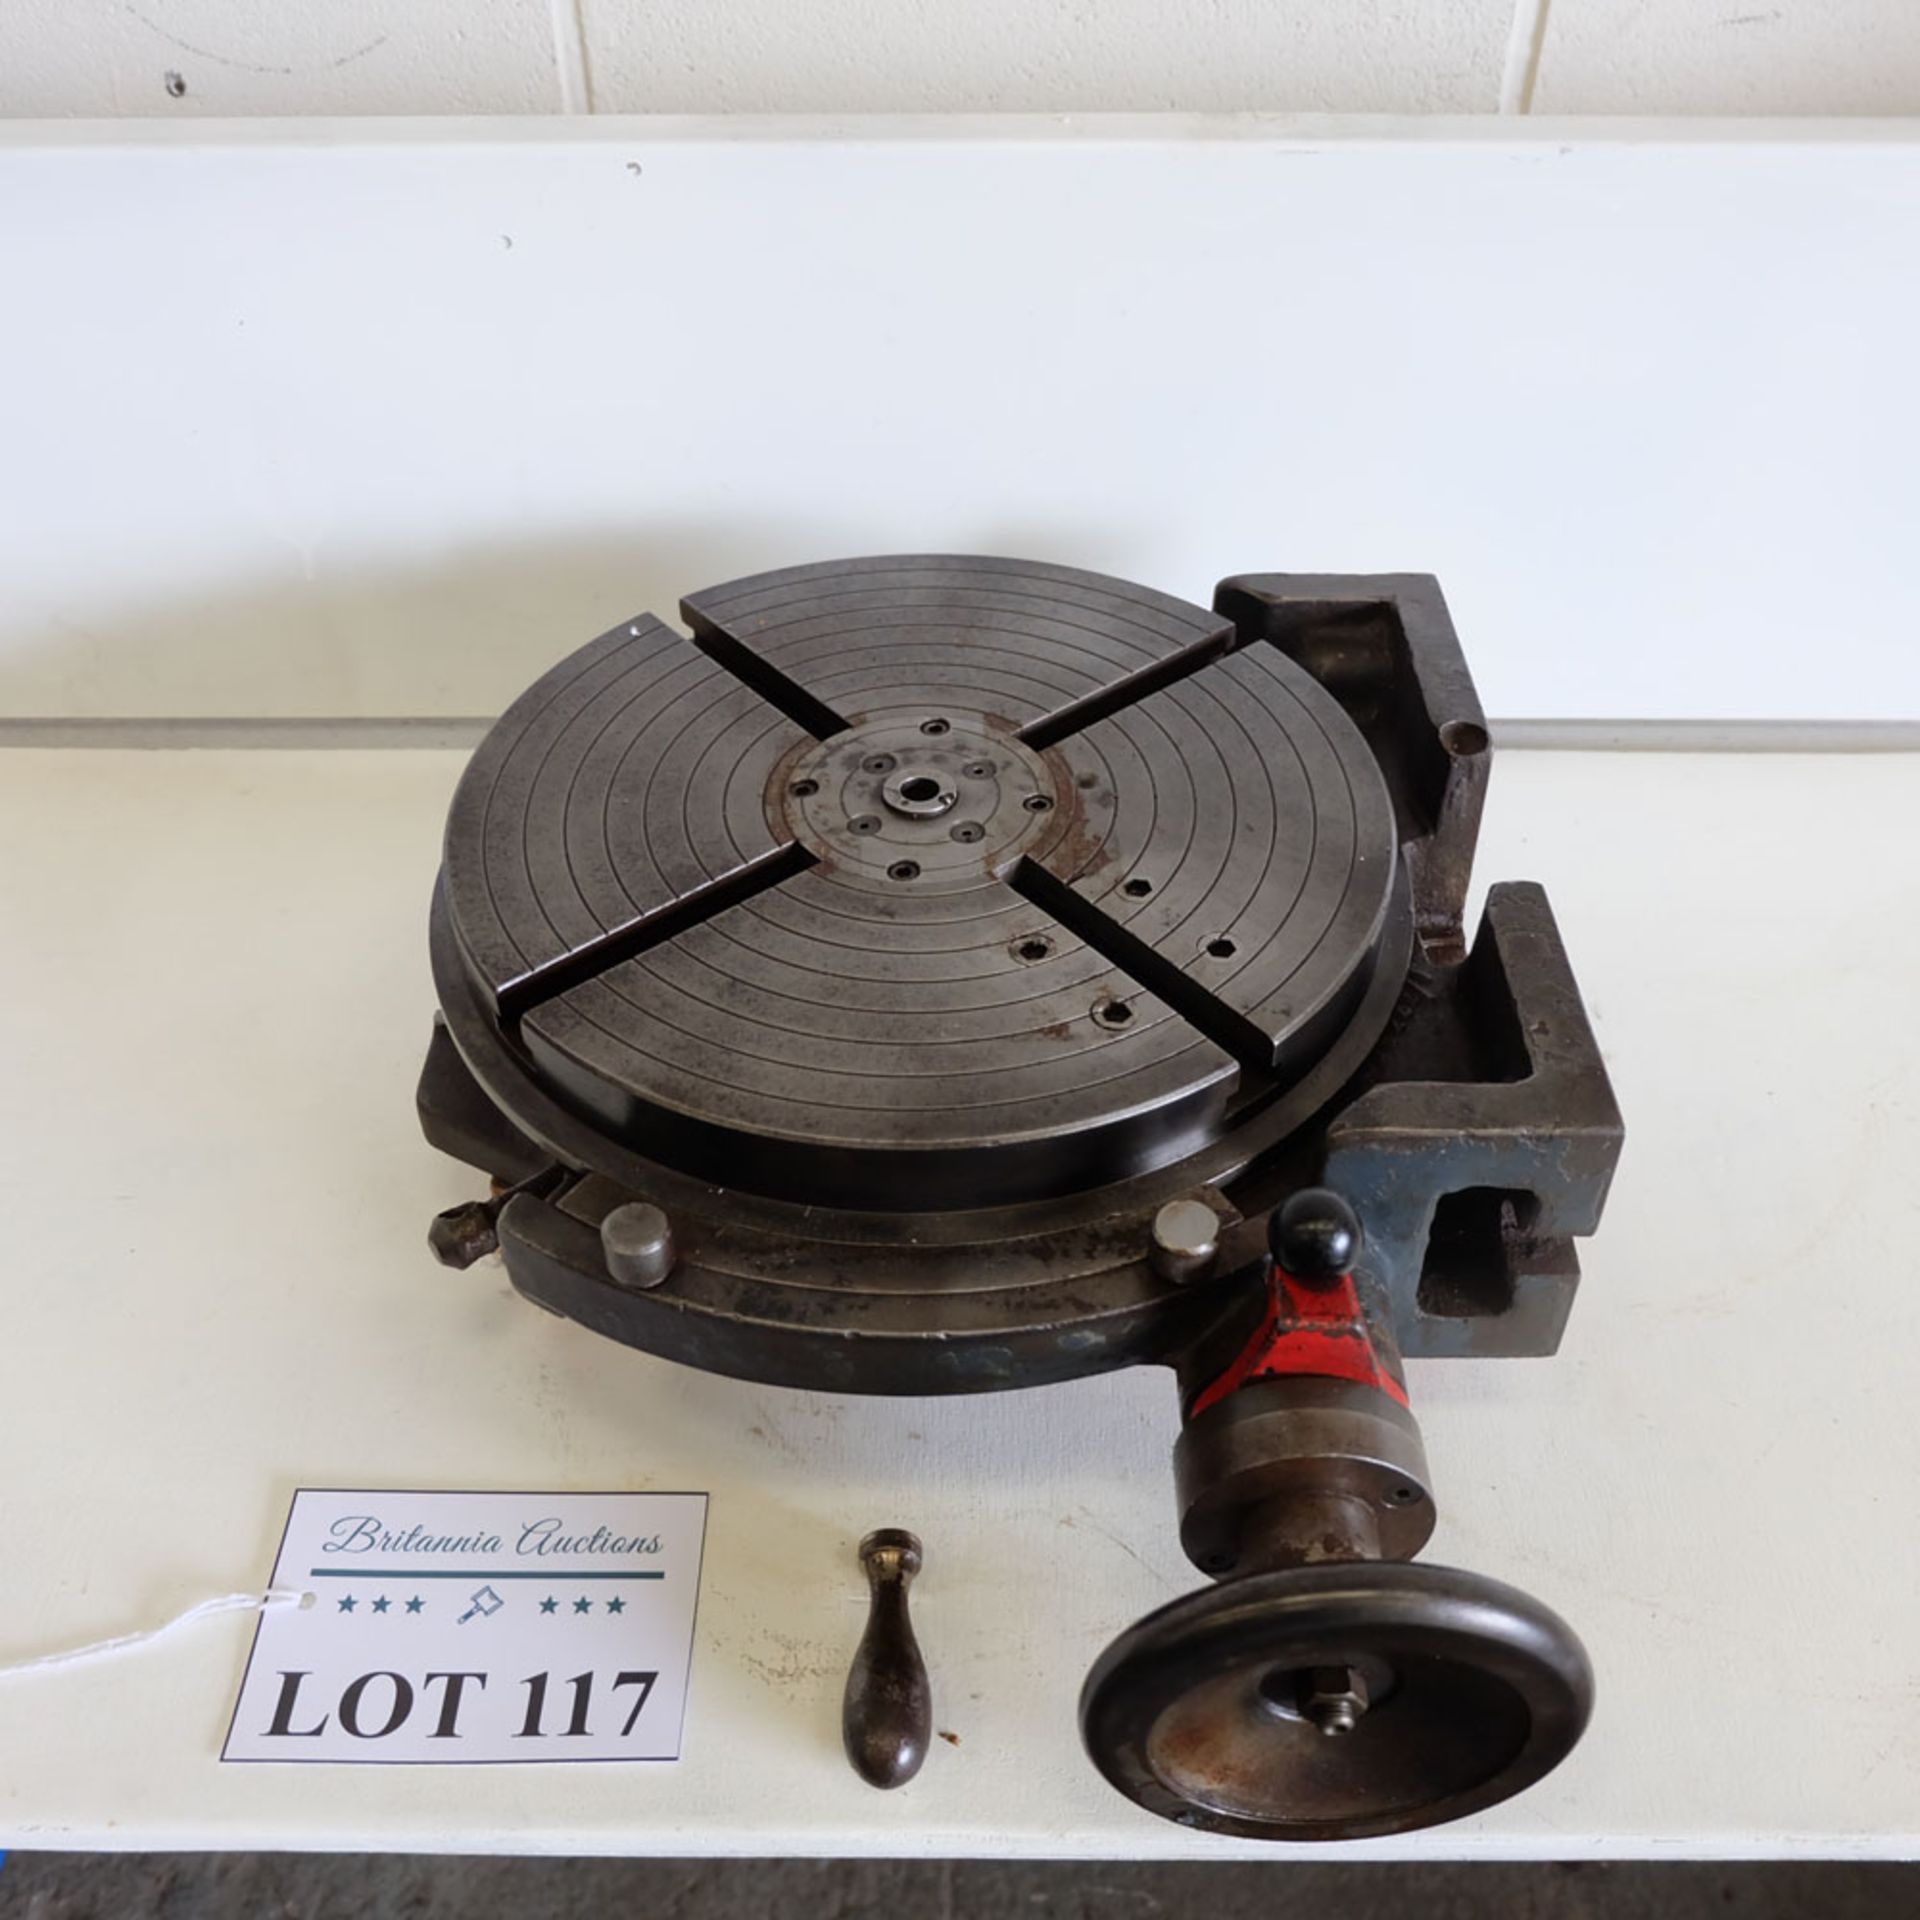 12" Rotary Table.